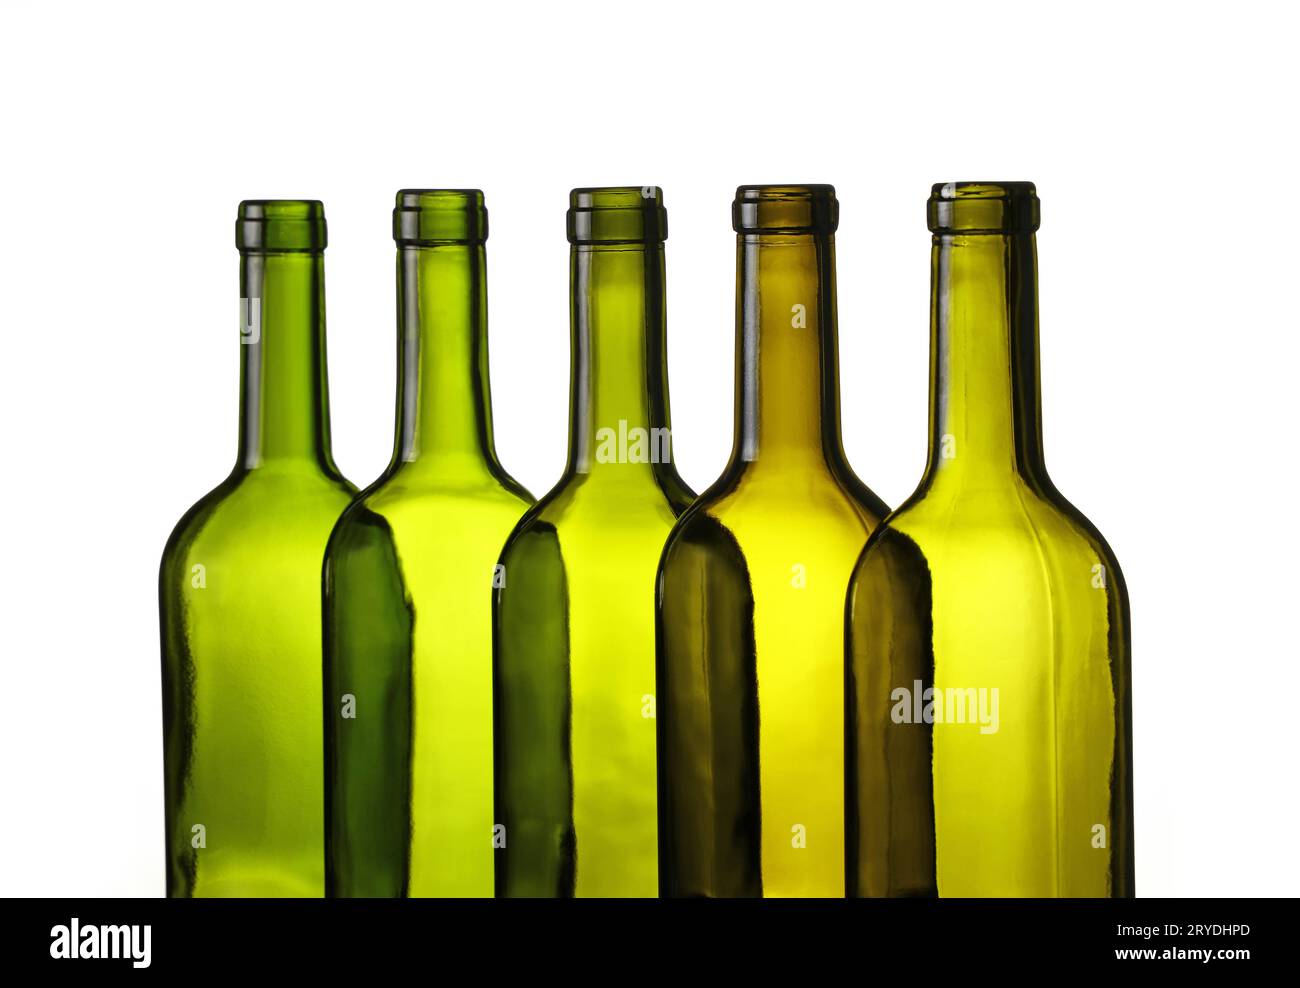 Empty green glass wine bottles isolated on white Stock Photo